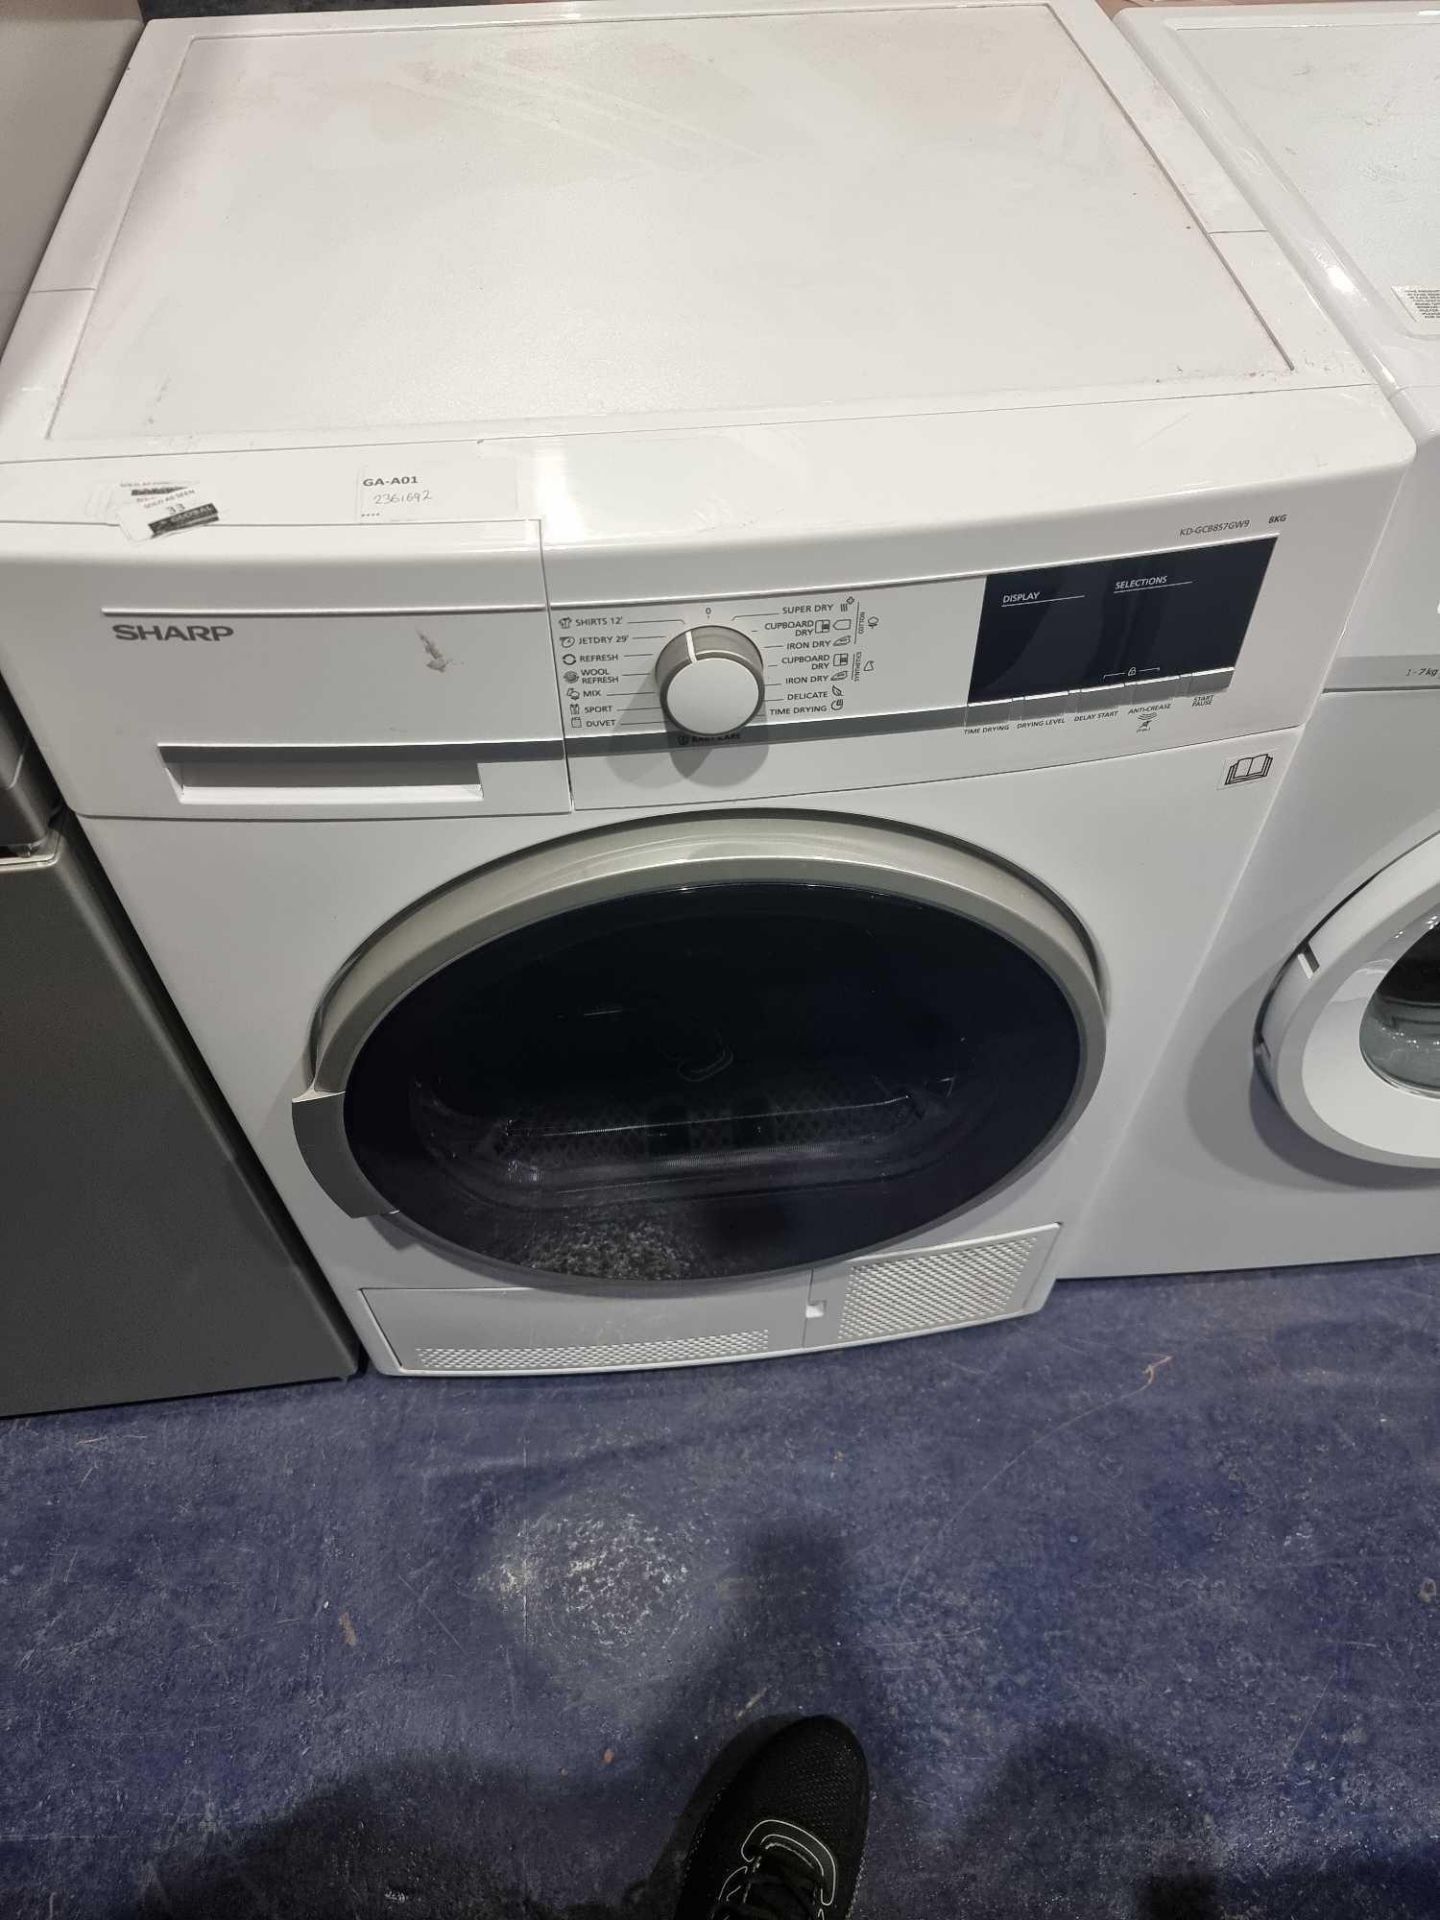 (Sp) RRP £300 Lot To Contain 1 Sharp Kd-Gcb8S7Gw9-En 8Kg Condenser Tumble Dryer - Image 3 of 4